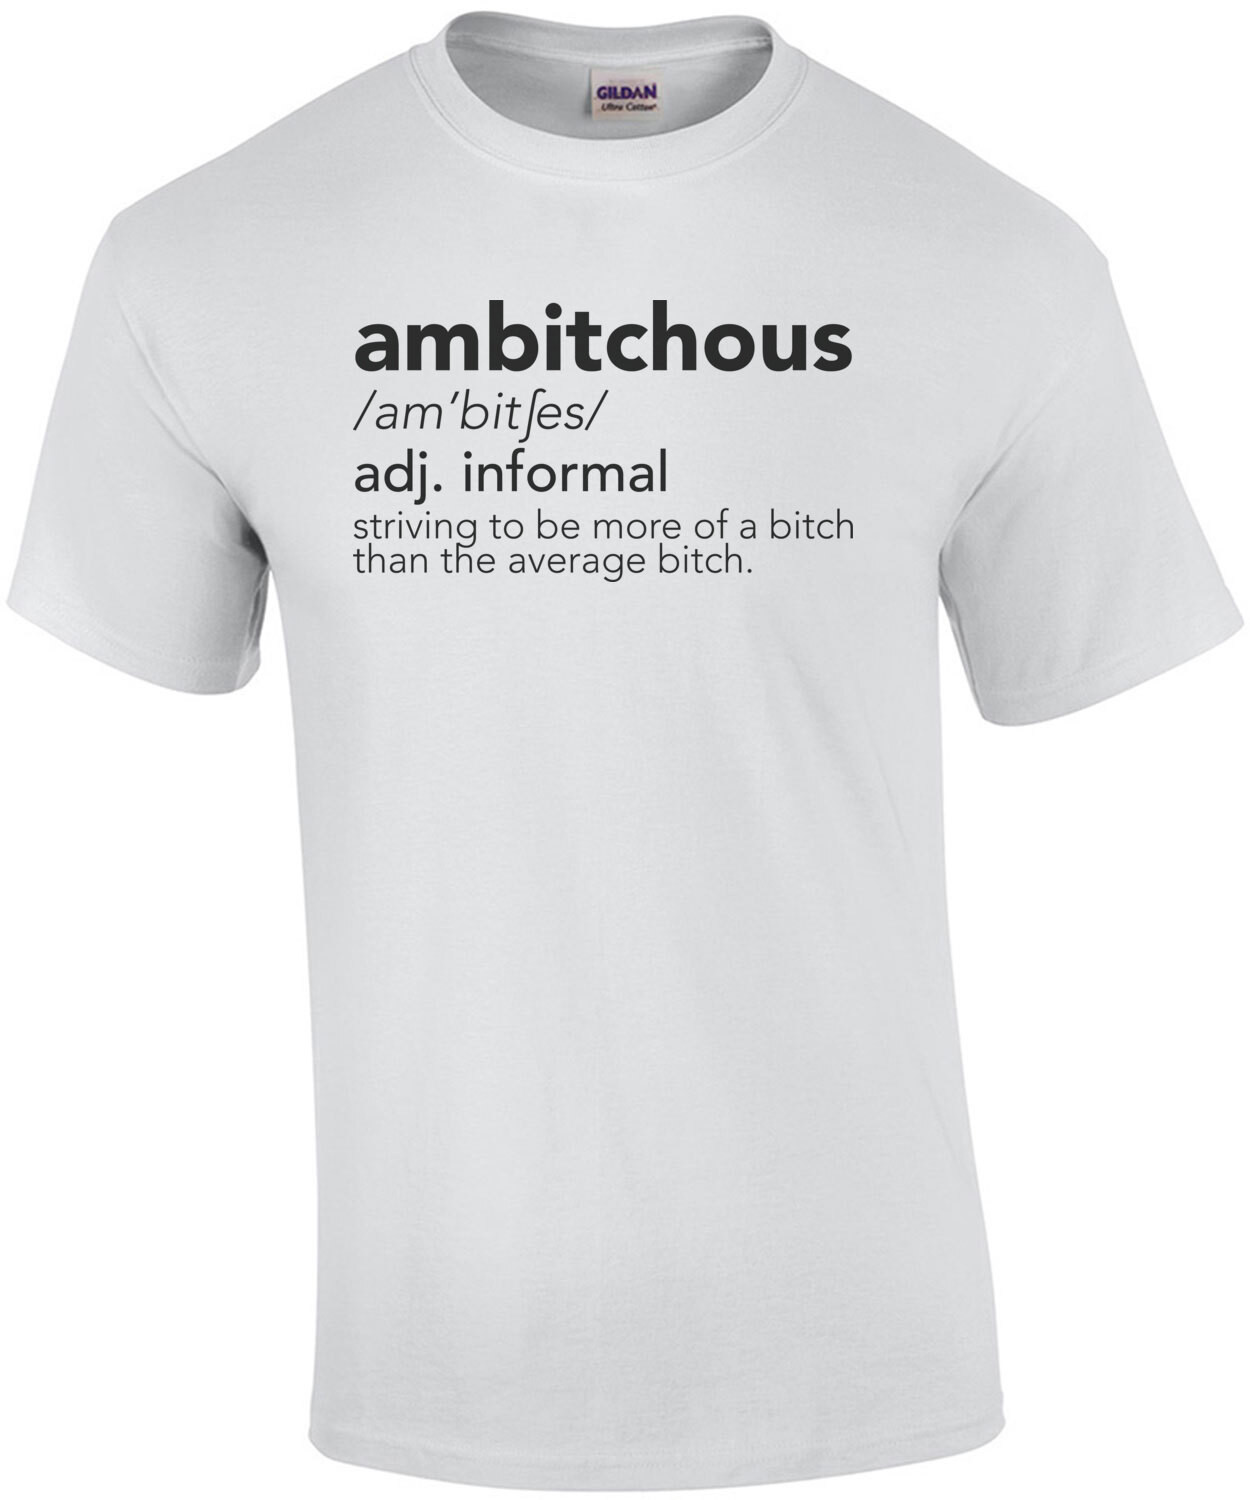 ambitchous Definition - Striving to be more of a bitch than the average bitch. funny ladies t-shirt